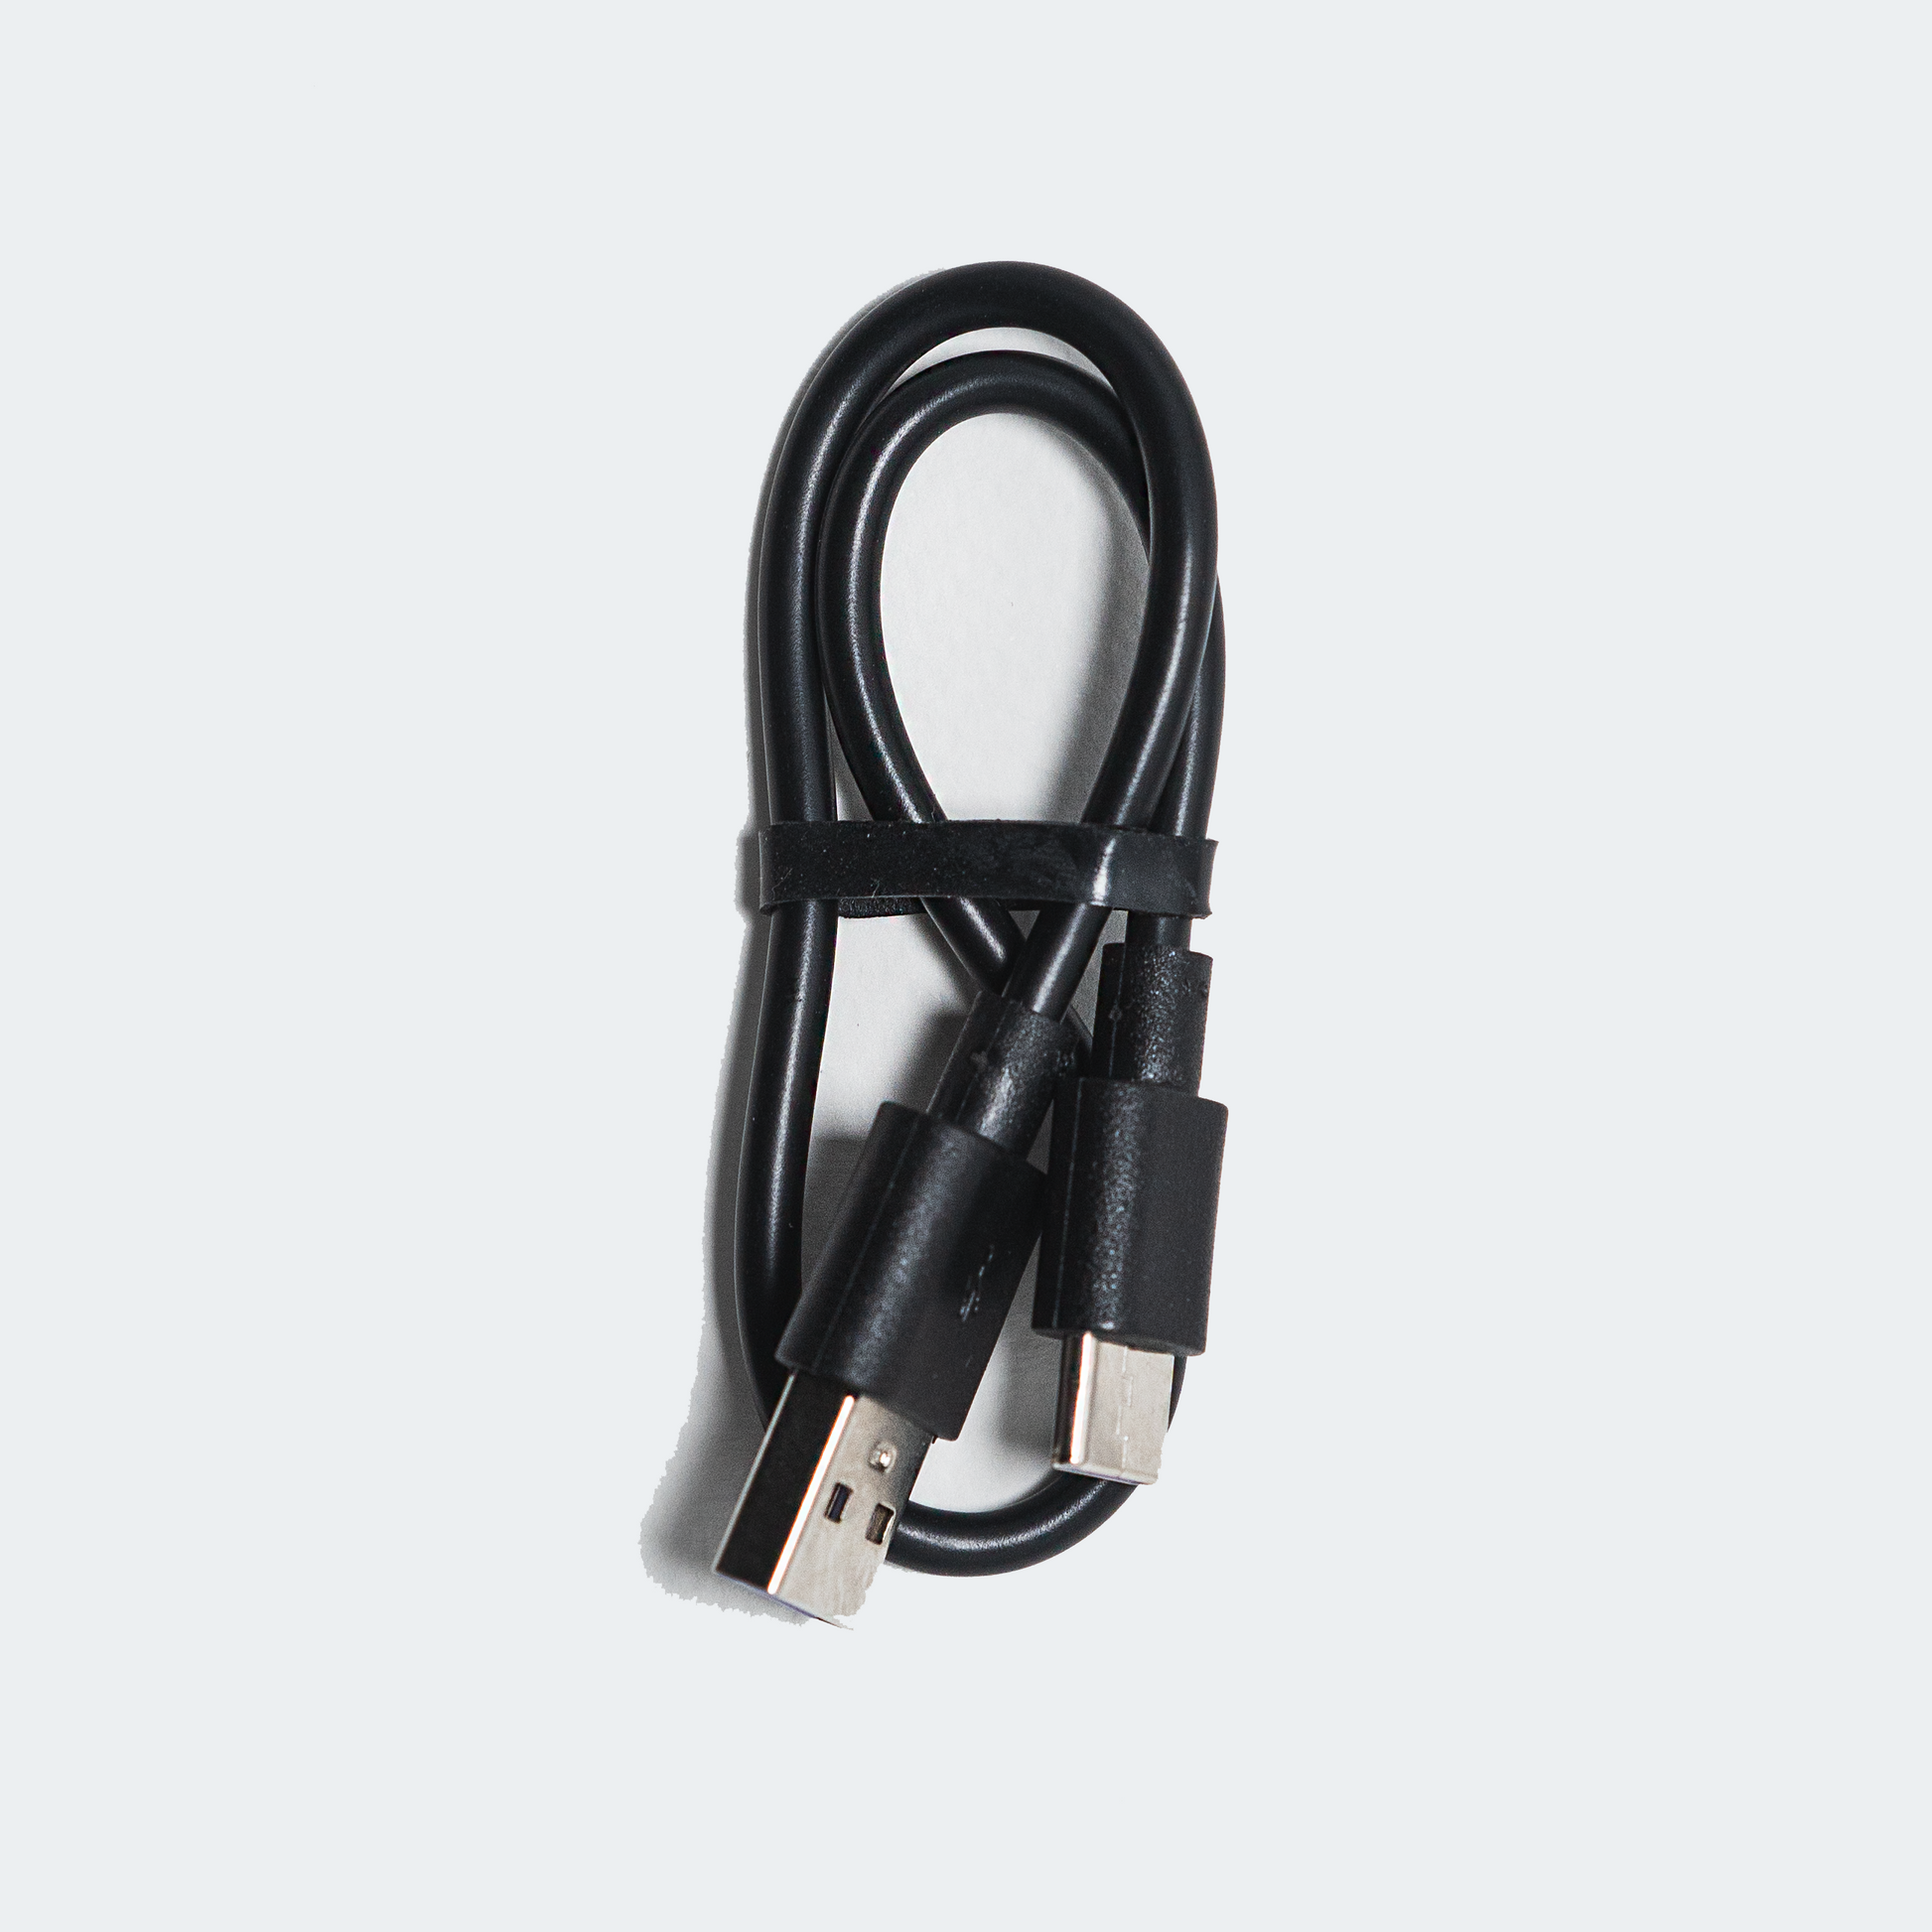 TOOOCYCLING USB Type C Charging Cable for TOOOCycling™ DVR80 30cm